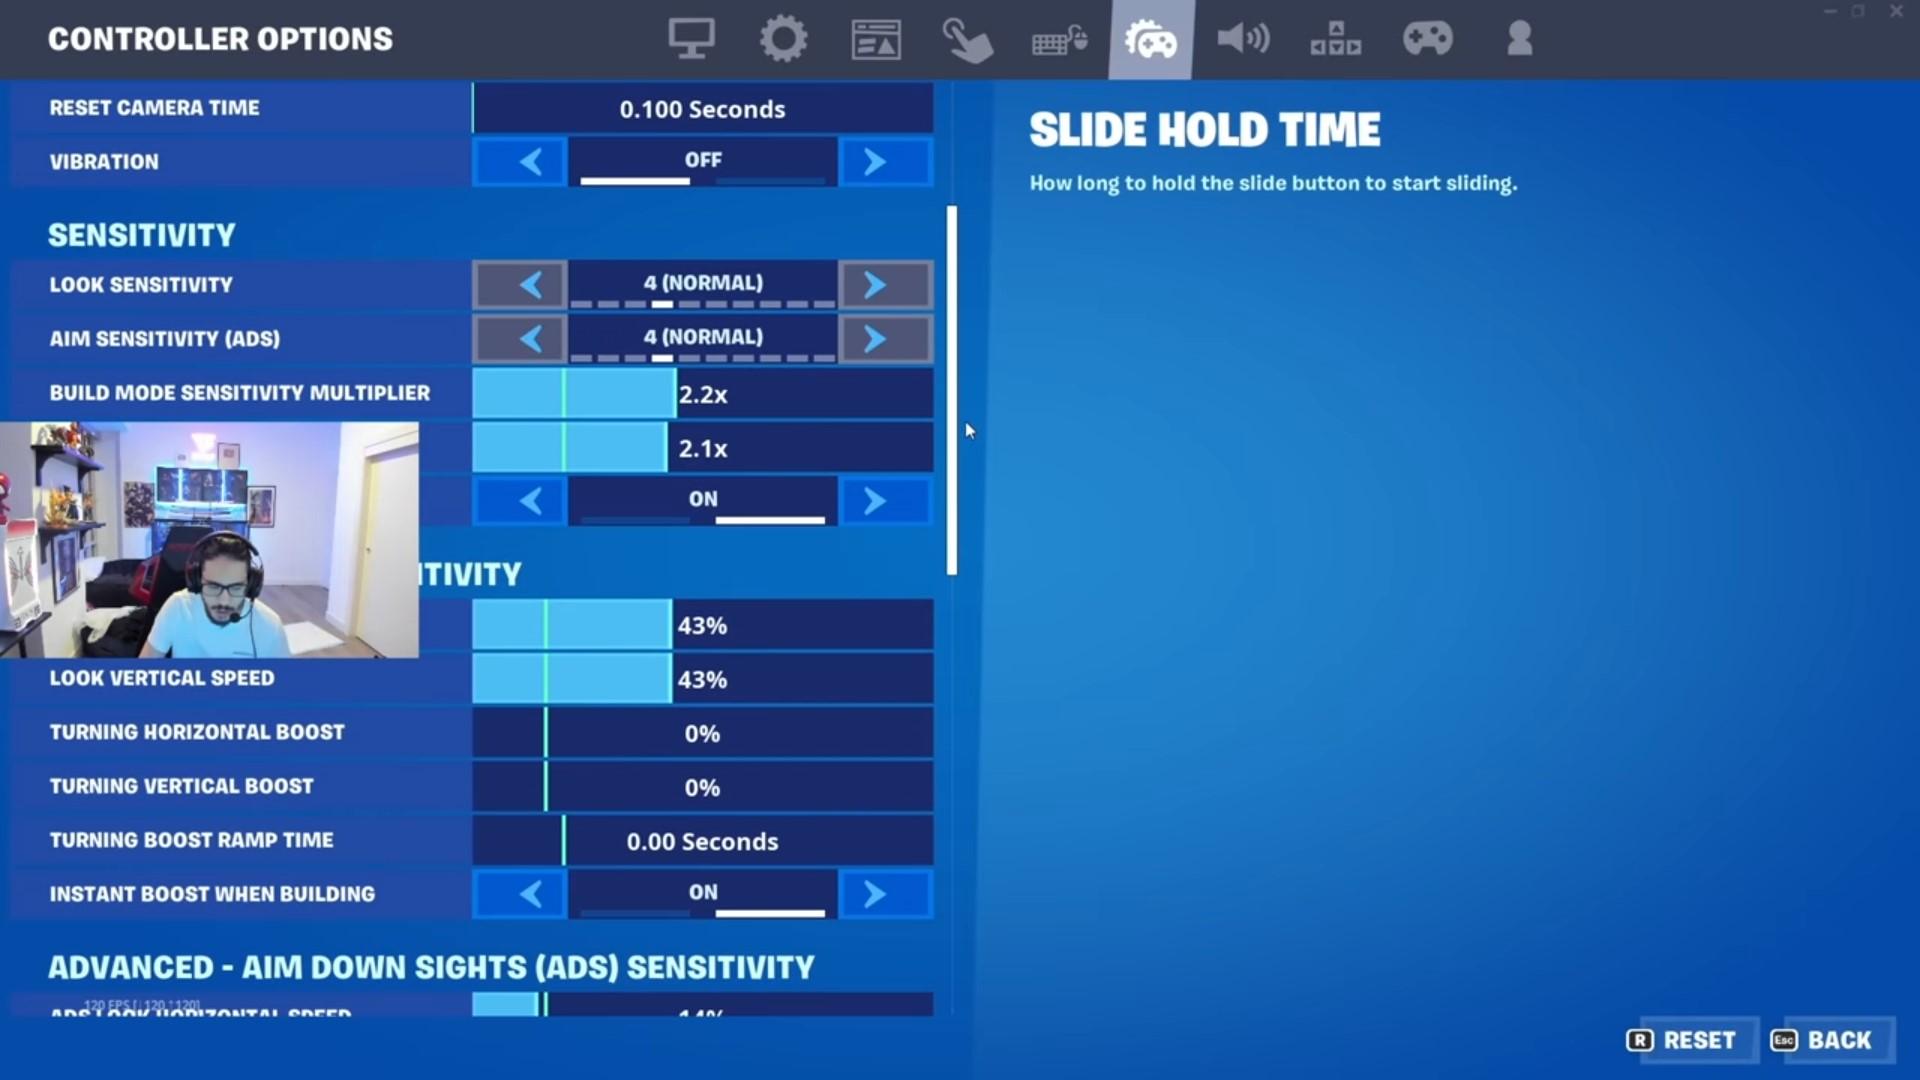 What Controller Settings Does FaZe Sway Use in Fortnite?